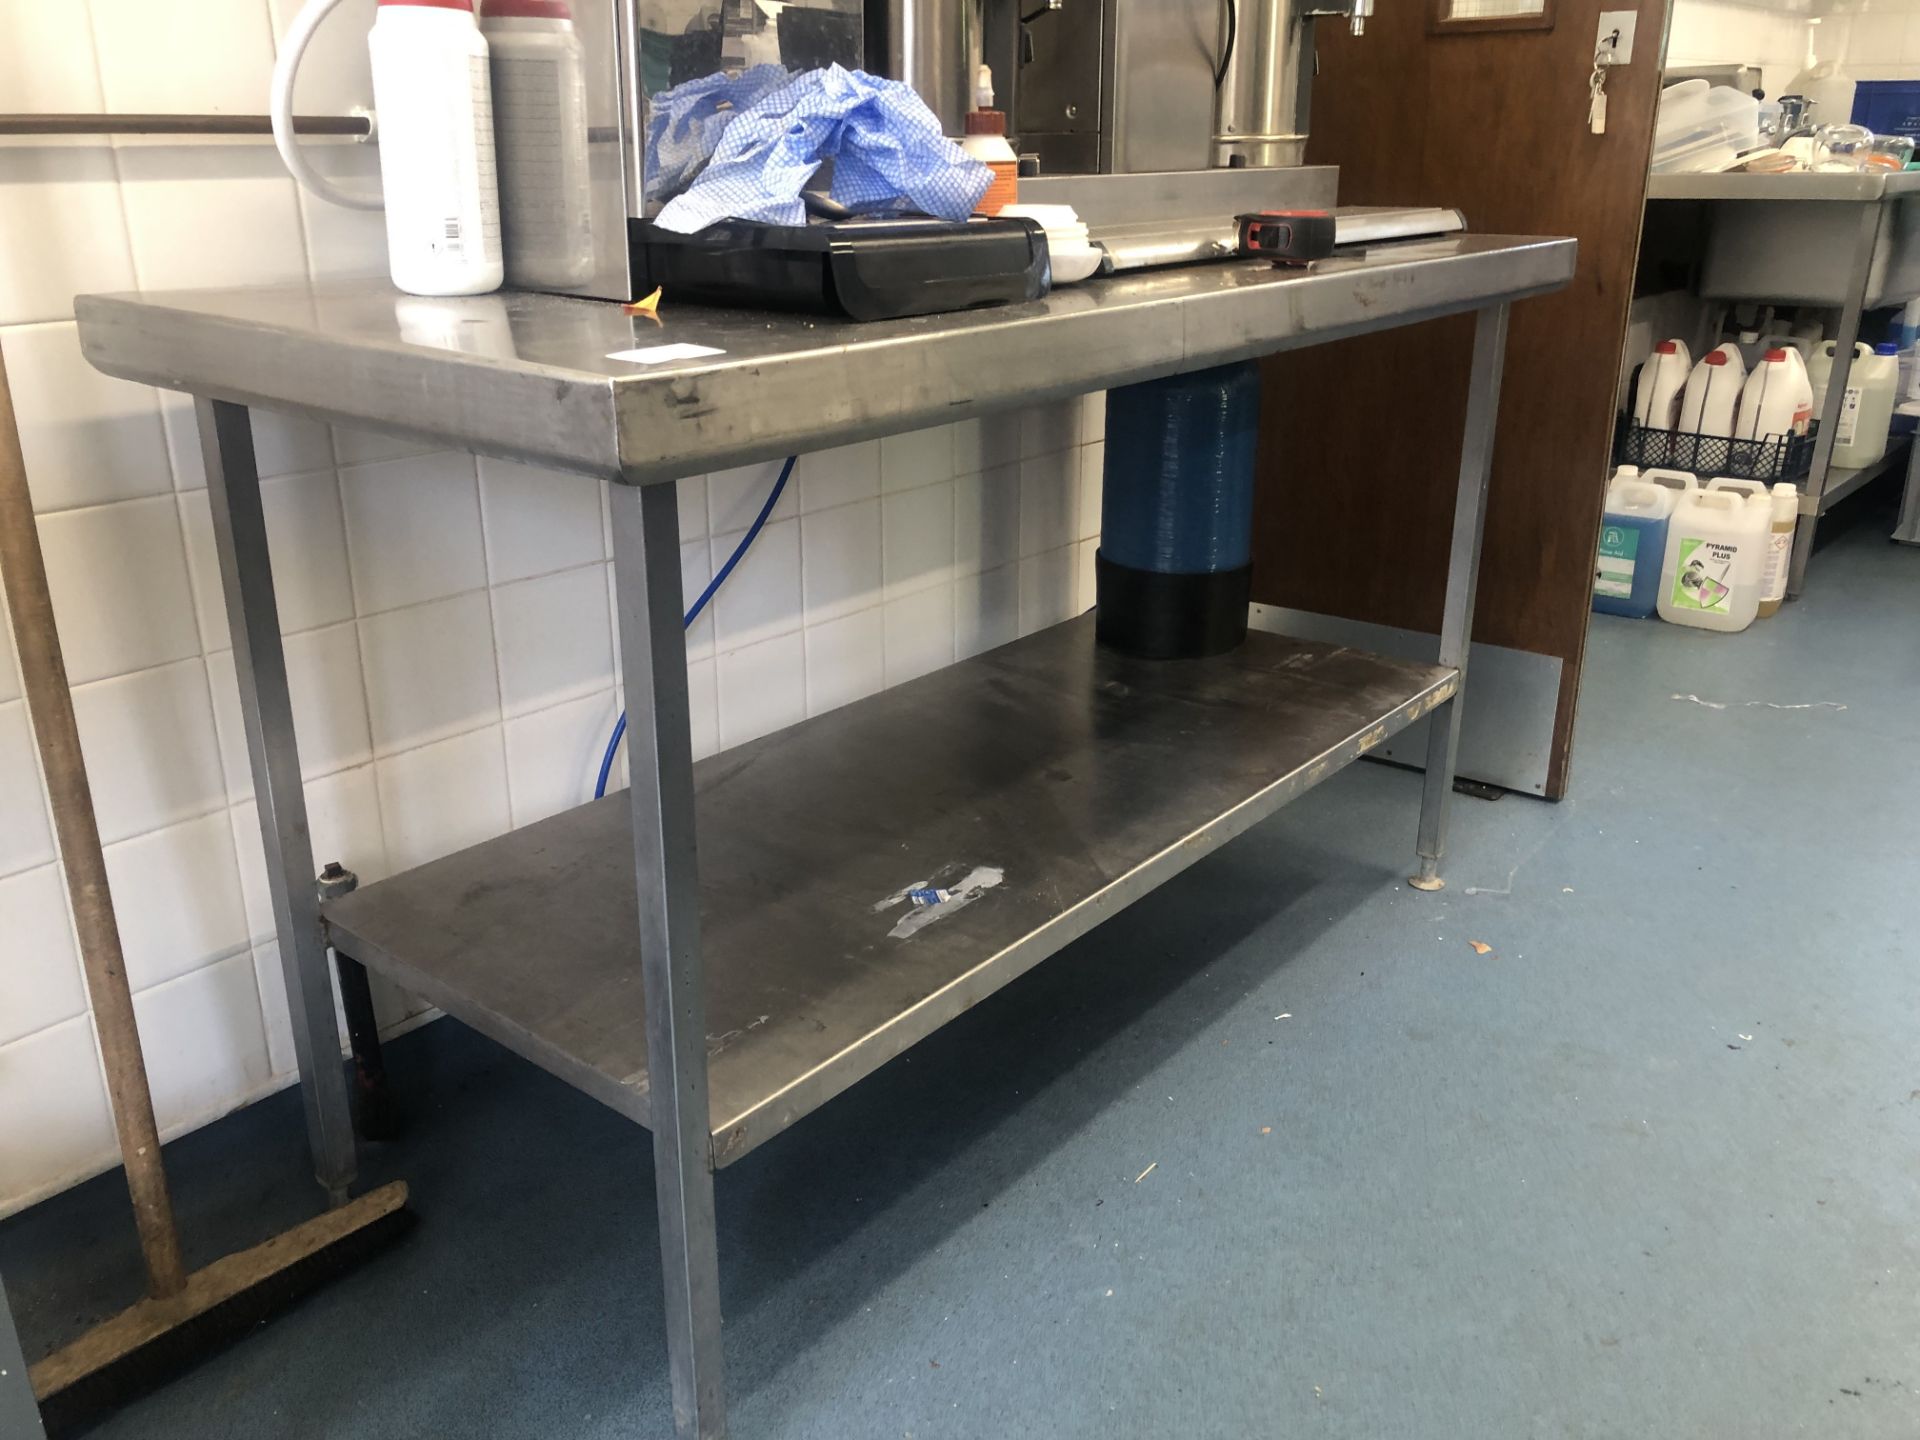 1500W 650D 850D - bottom storage shelf, *contents not included* - Please note this Lot is located at